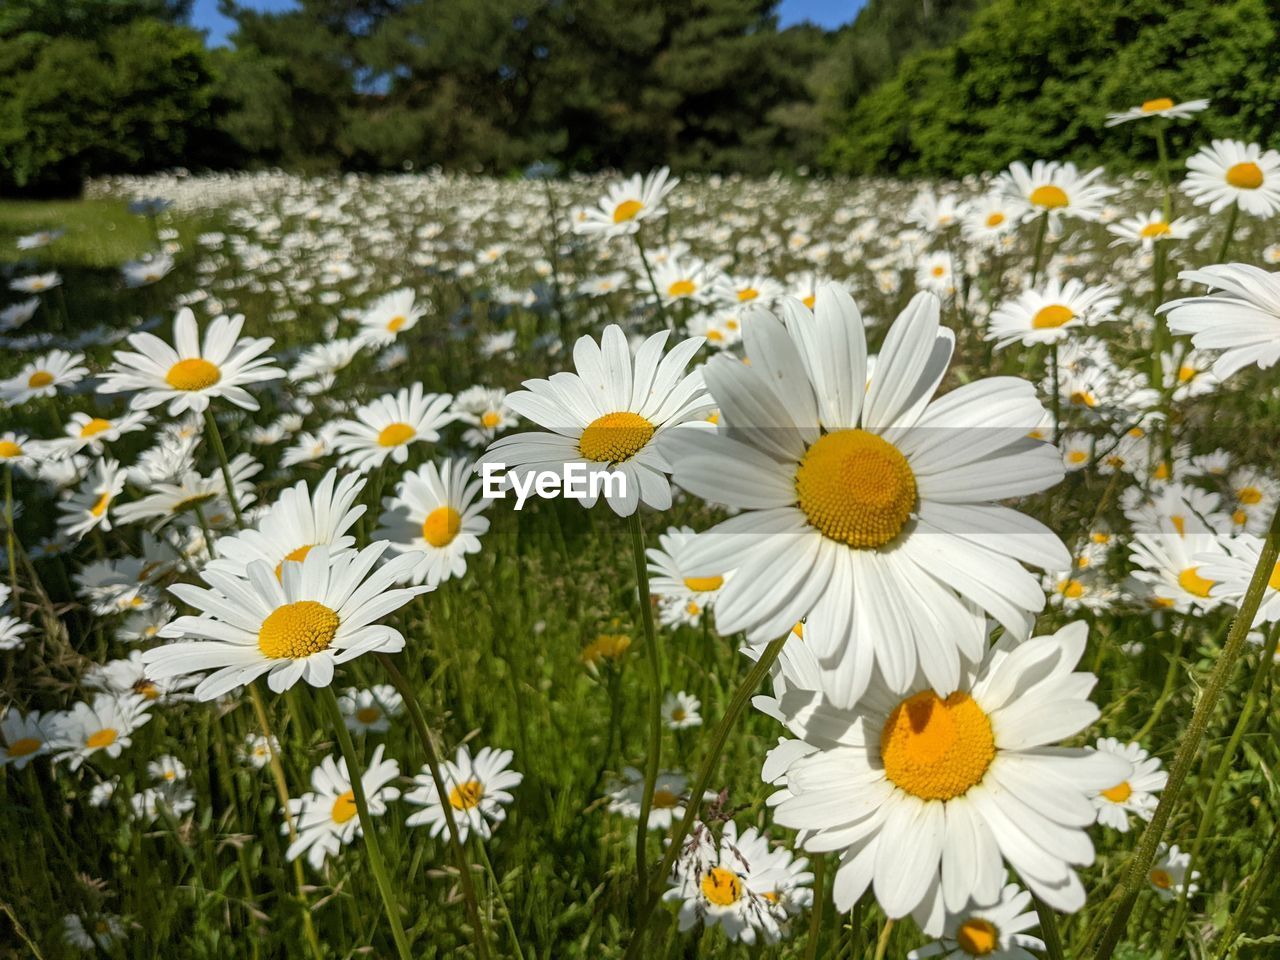 plant, flower, flowering plant, freshness, beauty in nature, growth, fragility, nature, daisy, flower head, petal, meadow, field, white, inflorescence, yellow, no people, close-up, land, grass, pollen, springtime, day, wildflower, landscape, outdoors, plain, botany, environment, blossom, sunlight, focus on foreground, green, rural scene, summer, sky